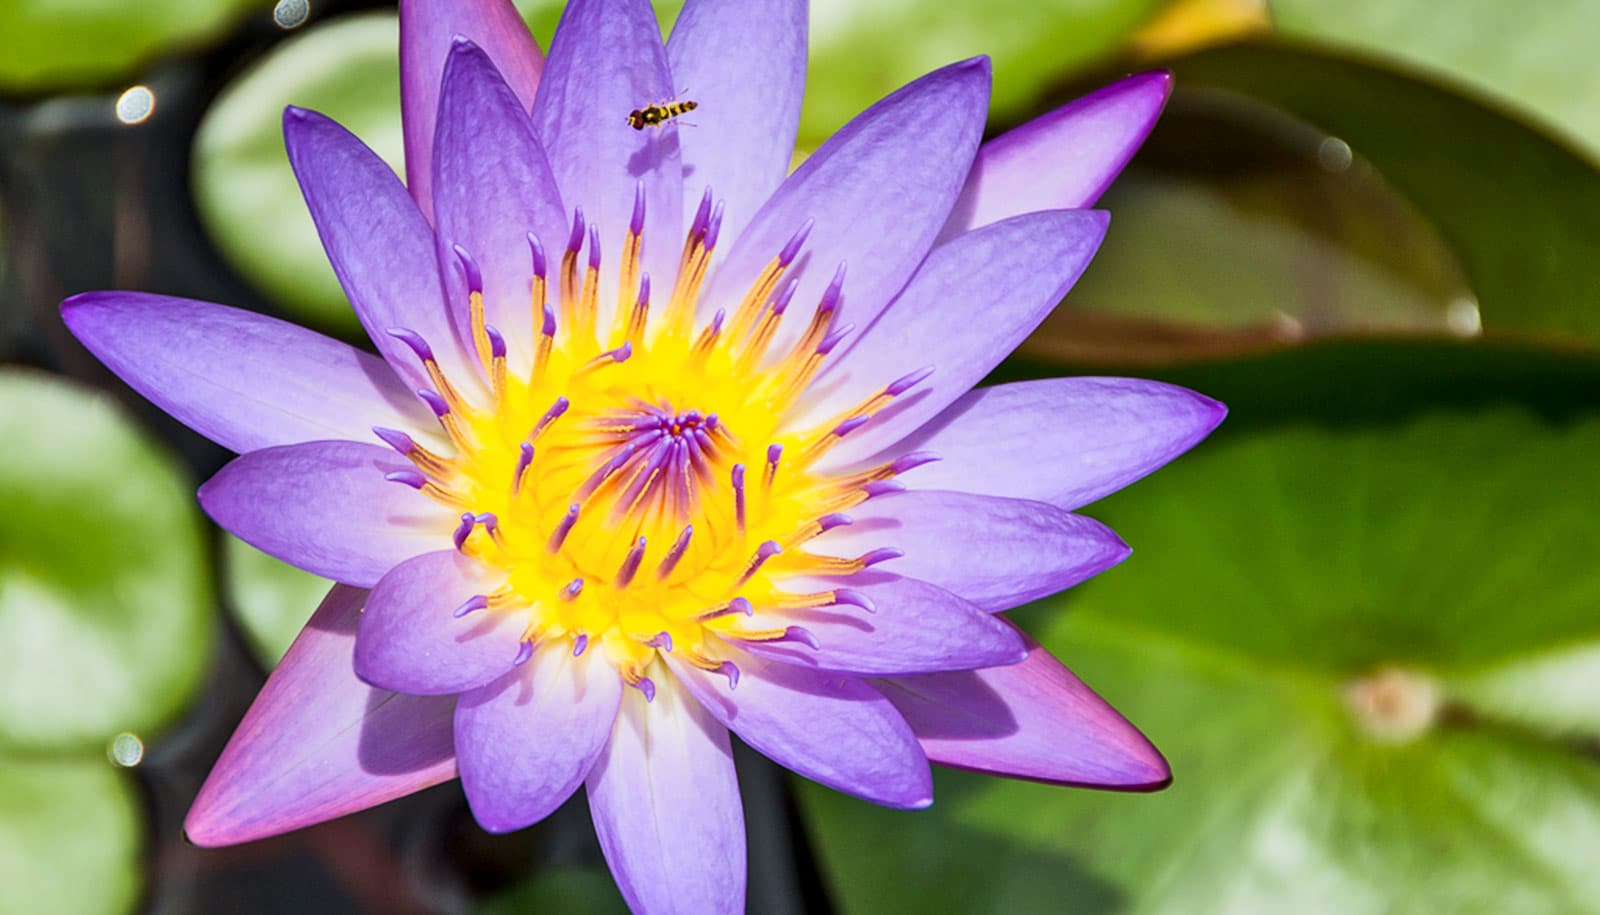 Water lily genome holds clues to flower plant evolution - Futurity: Research News